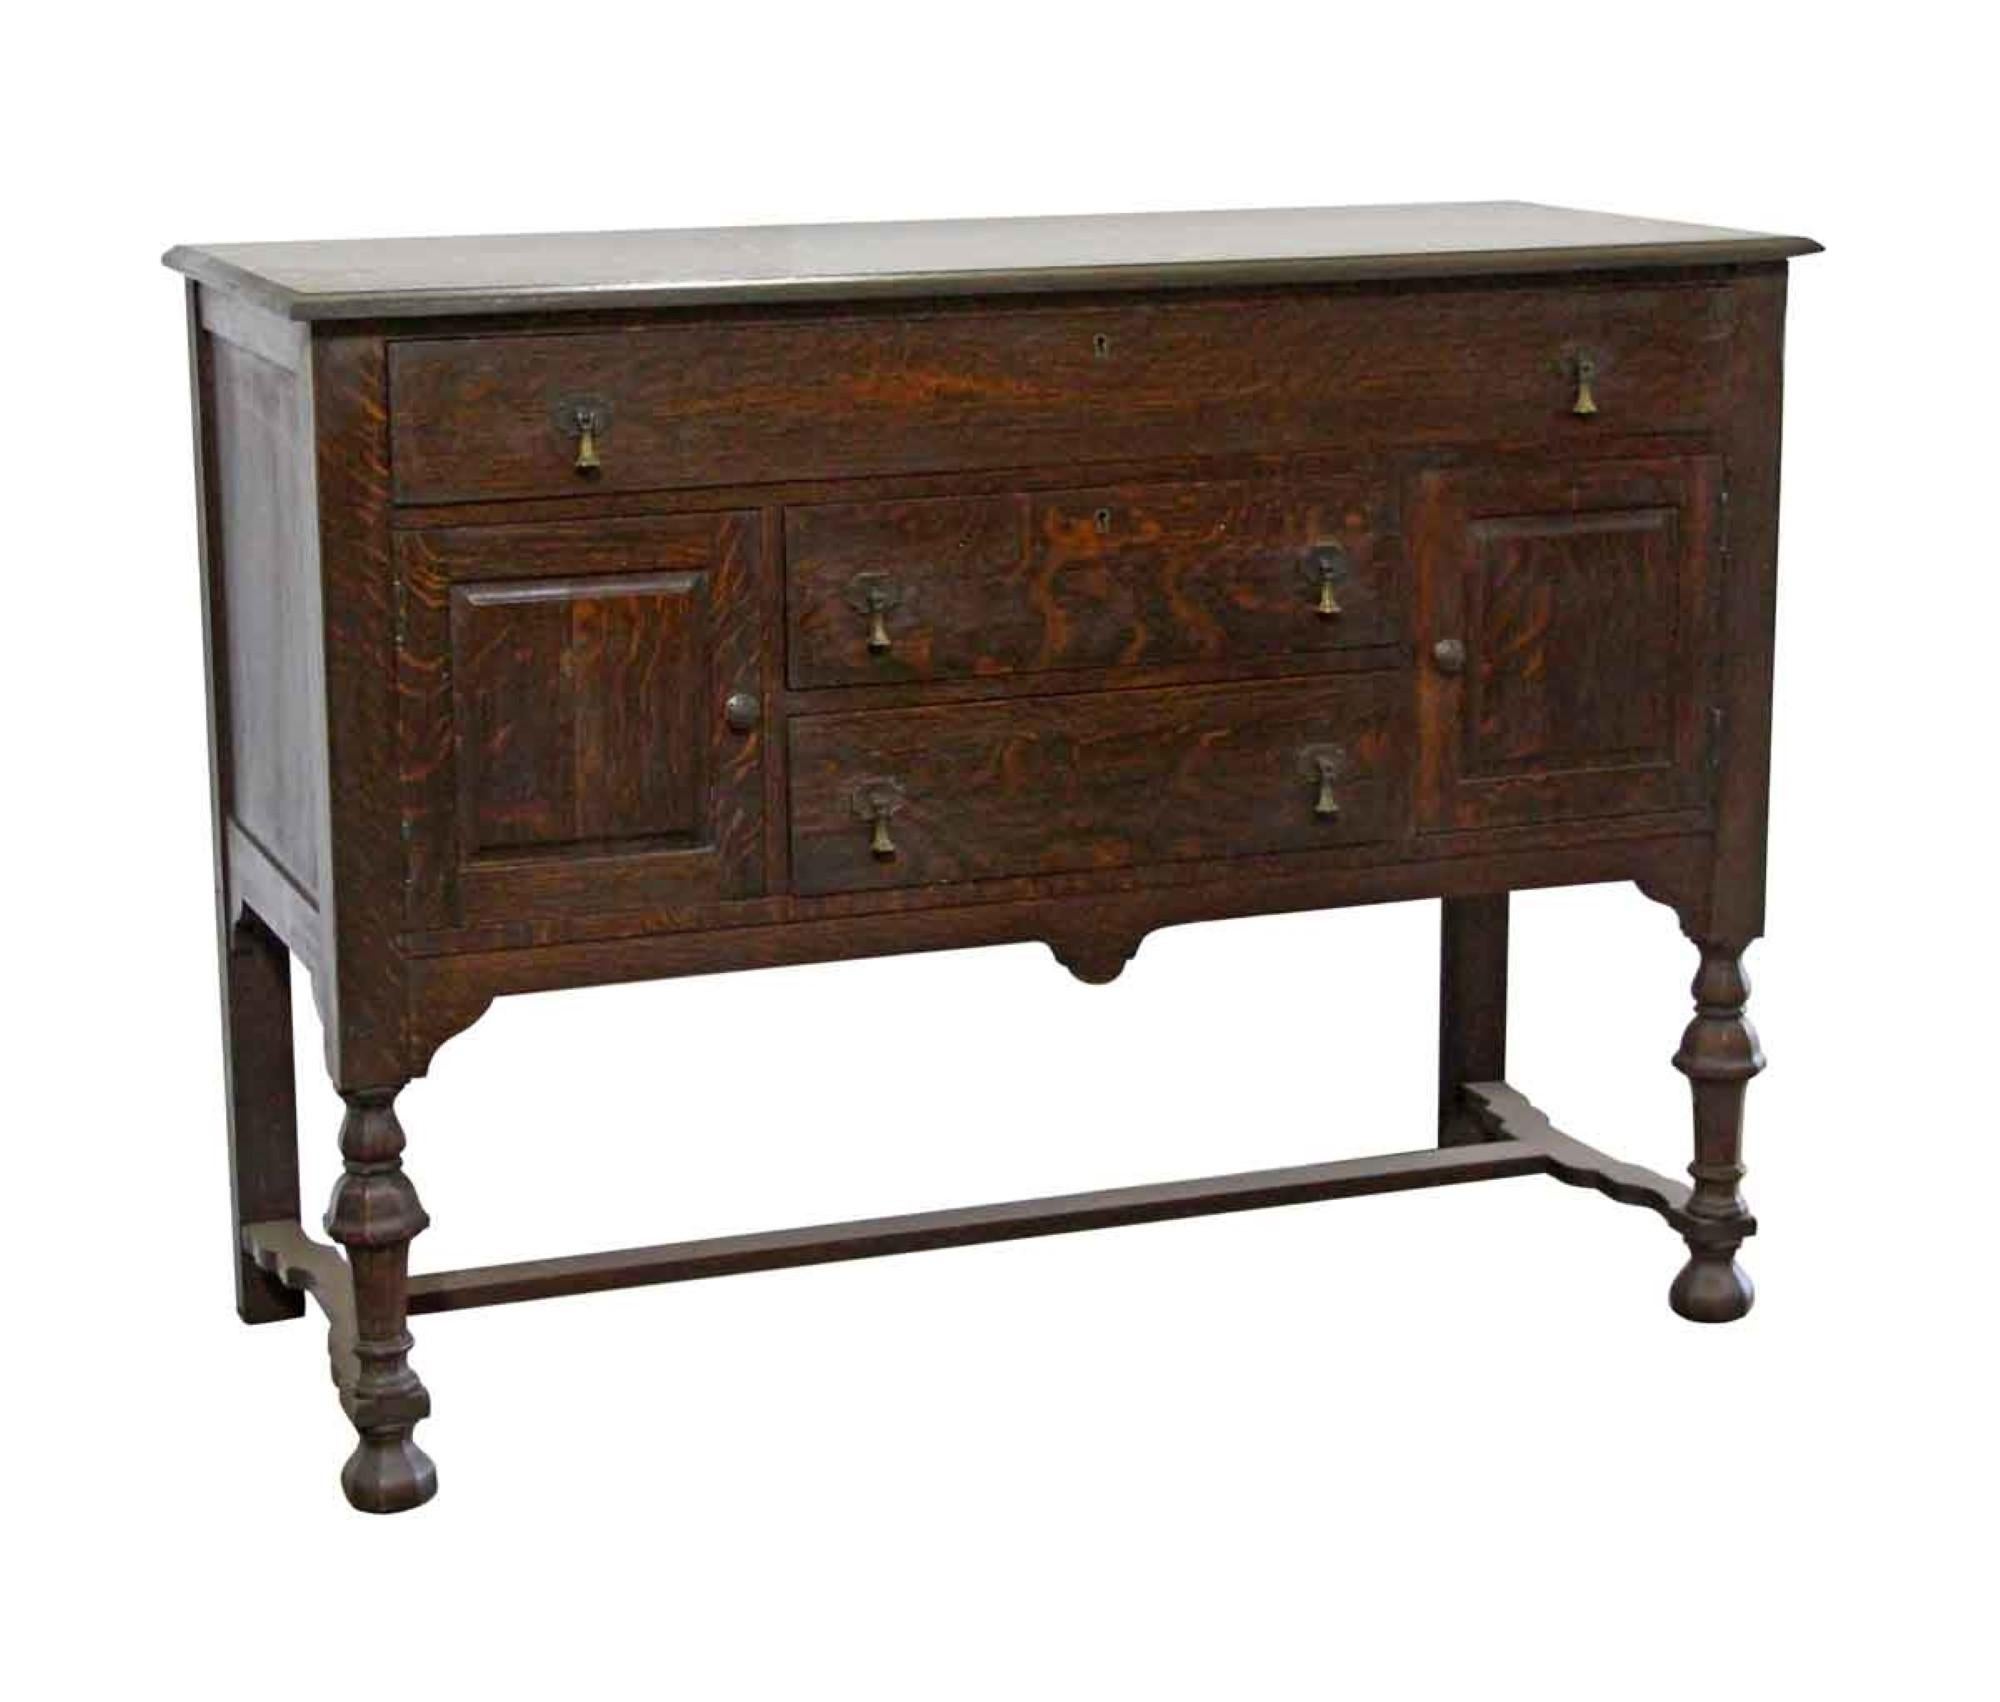 1905 Arts & Crafts style tiger oak sideboard with a dark finish, three drawers and two cubicles. Featuring teardrop drawer pulls. Made by Easton Manufacturing Company, Easton MD. This can be seen at our 400 Gilligan St location in Scranton, PA.